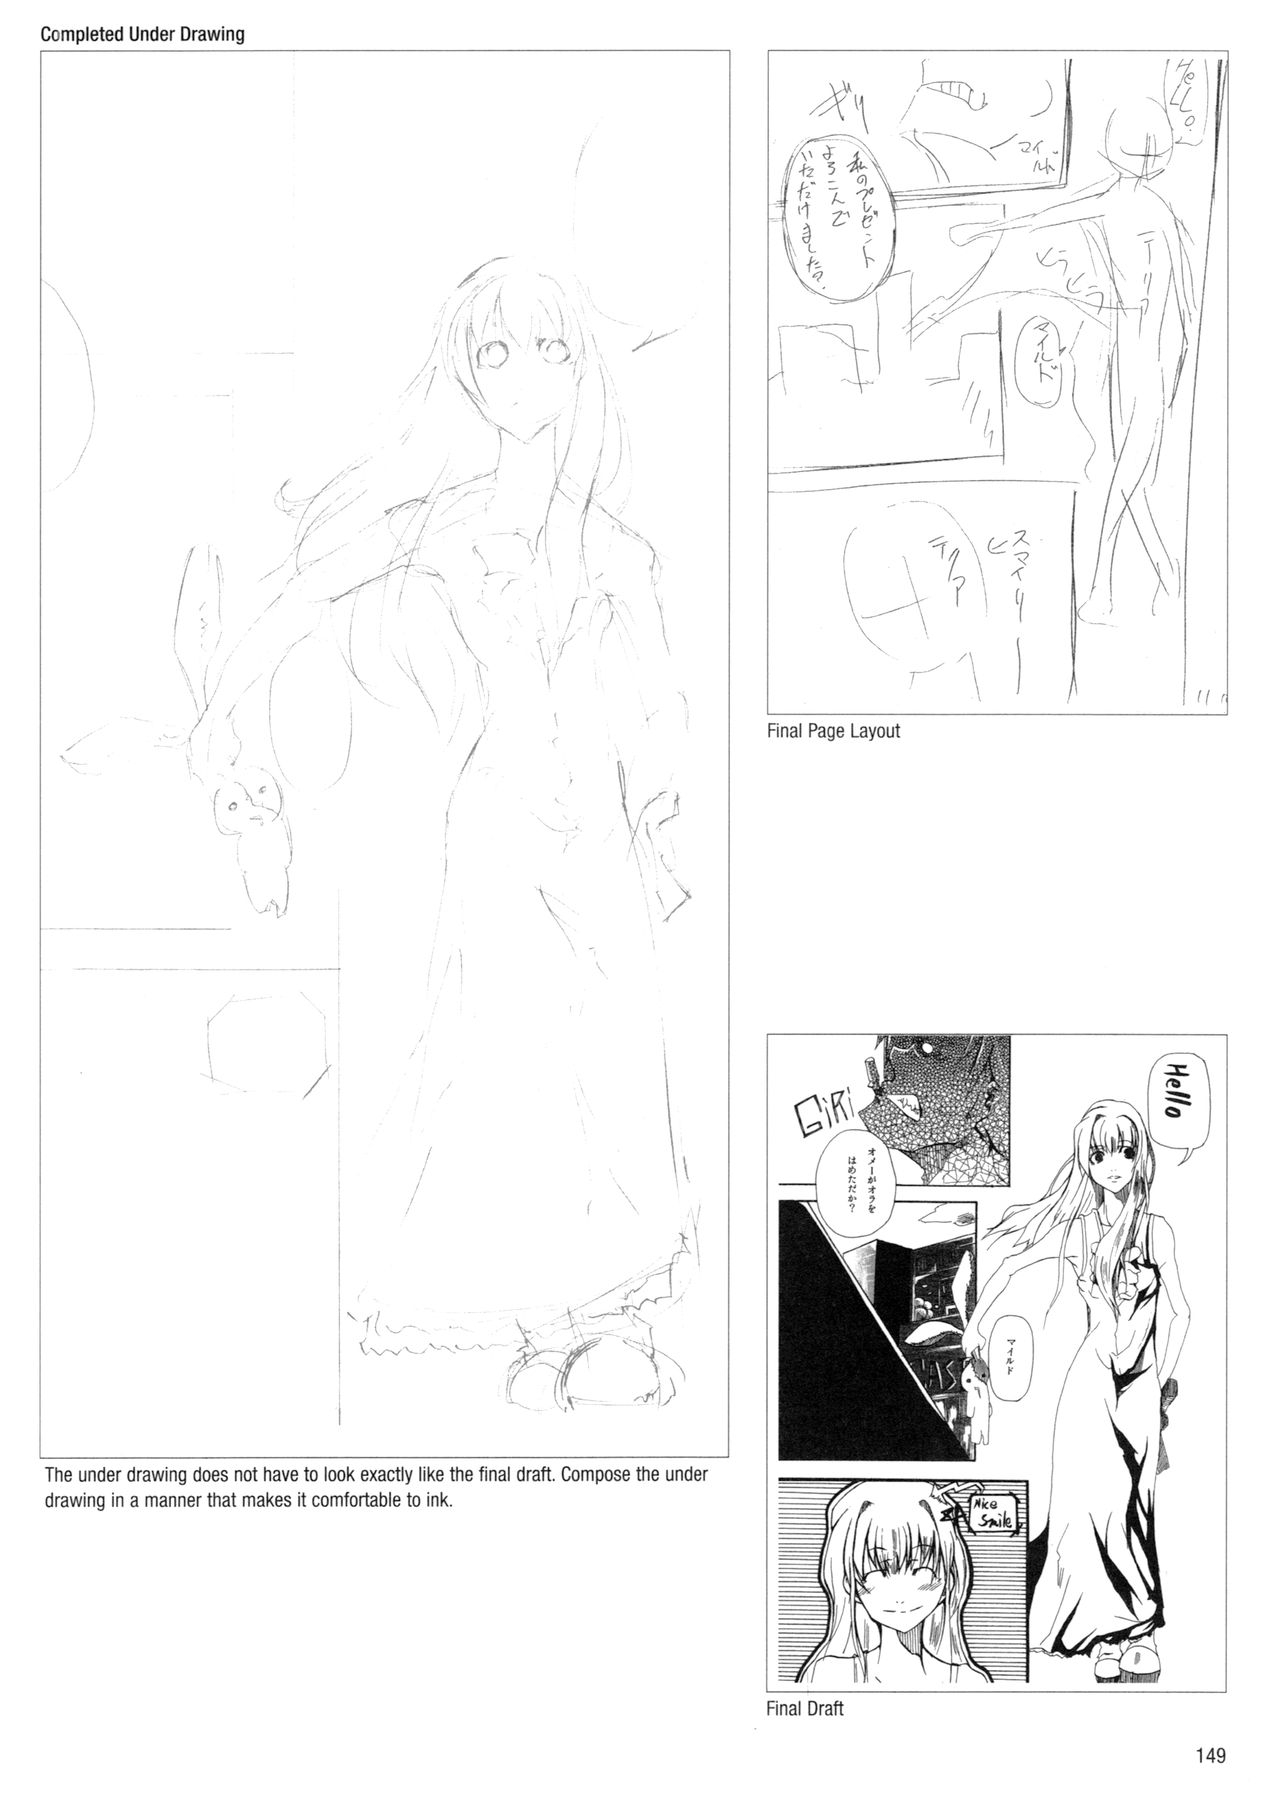 Sketching Manga-Style Vol. 3 - Unforgettable Characters 148